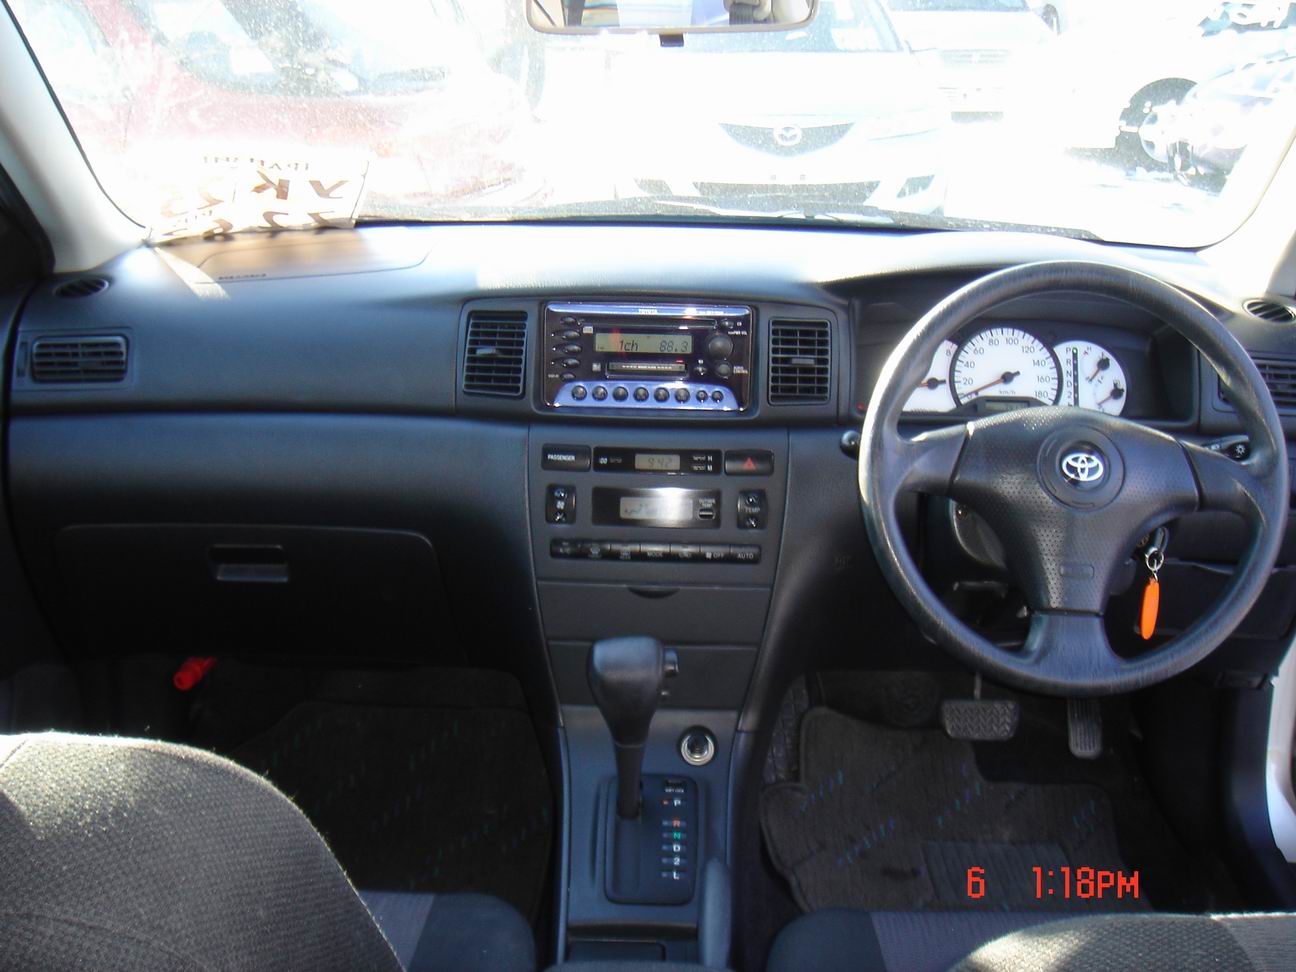 2001 Toyota allex review